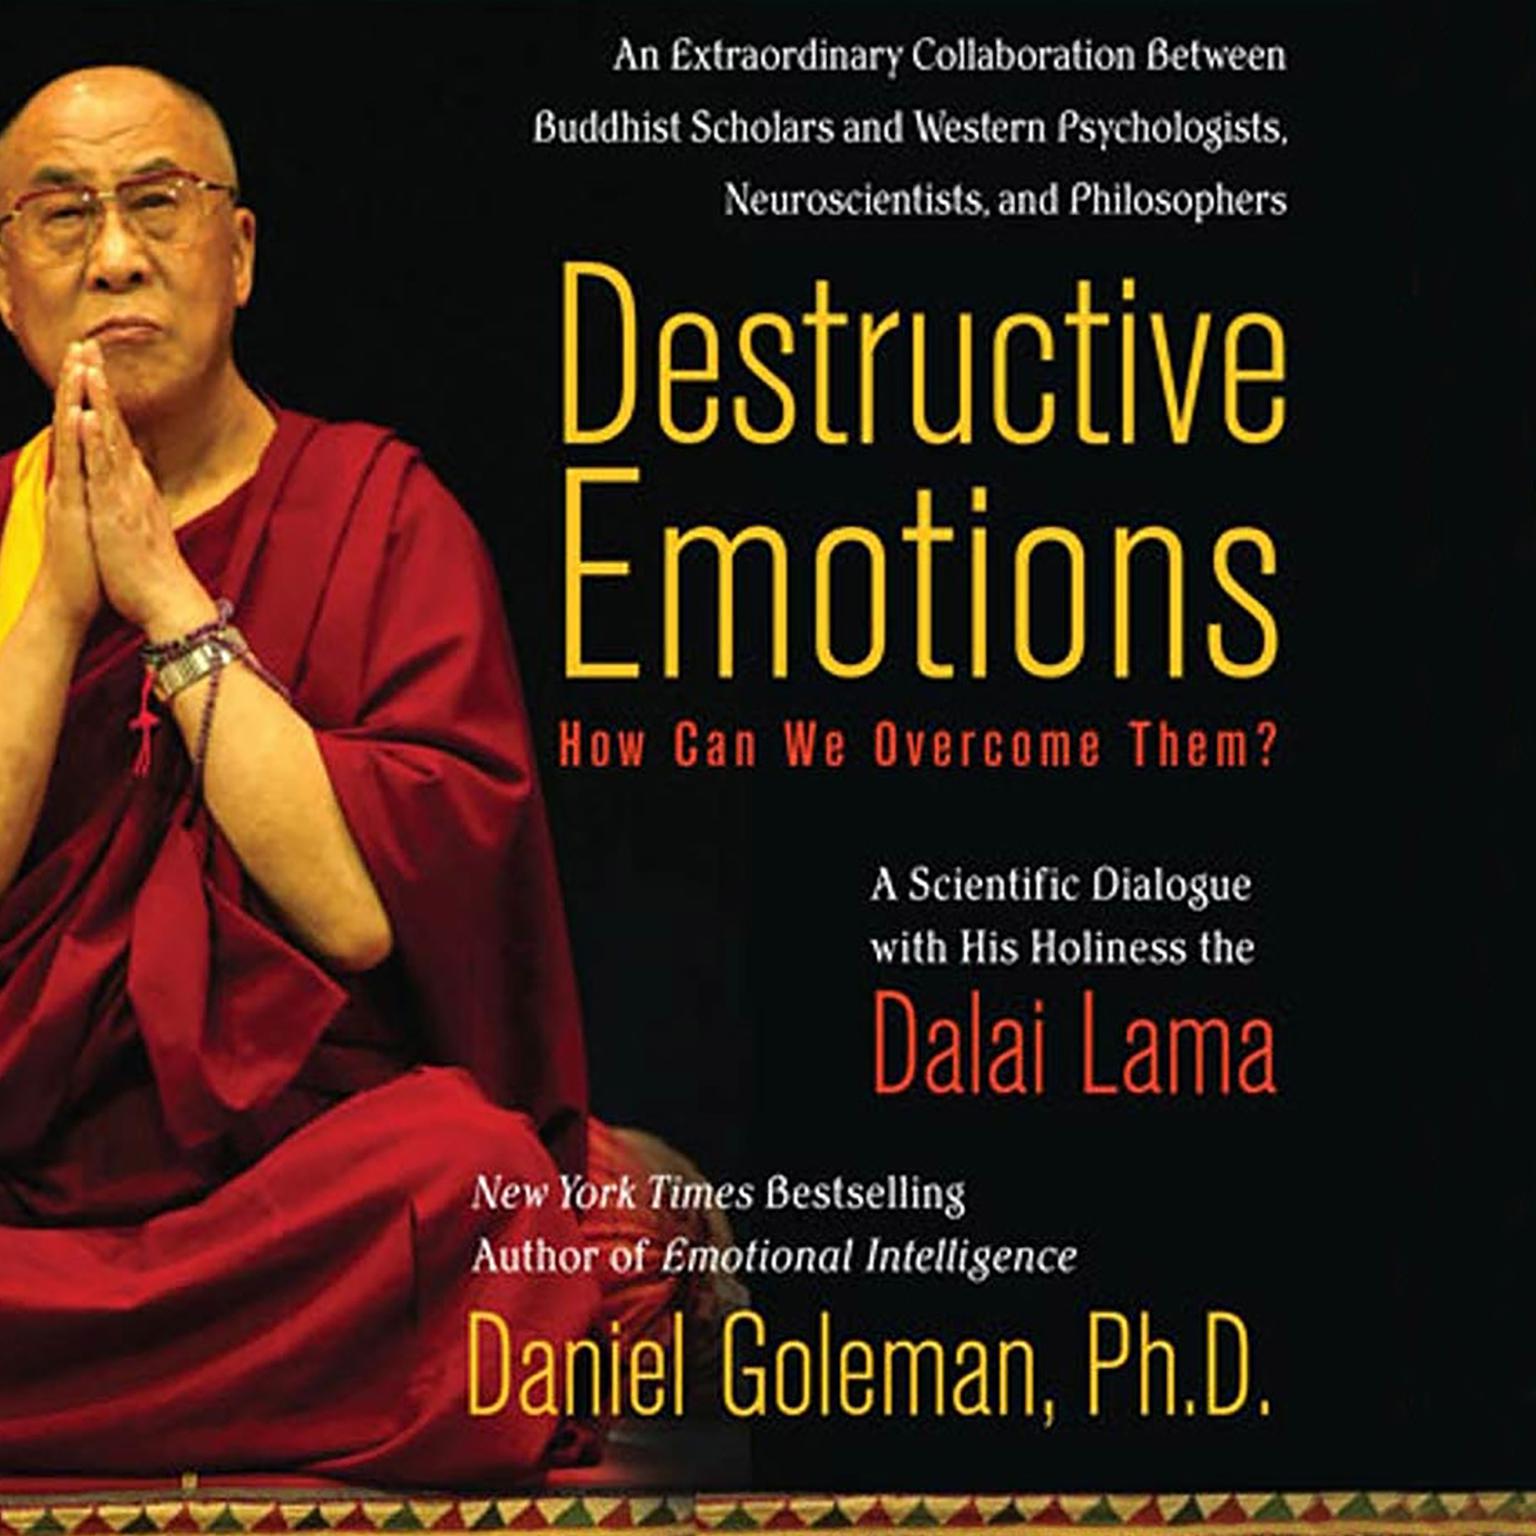 Destructive Emotions: How Can We Overcome Them? (Abridged): A Scientific Dialogue with the Dalai Lama Audiobook, by Daniel Goleman